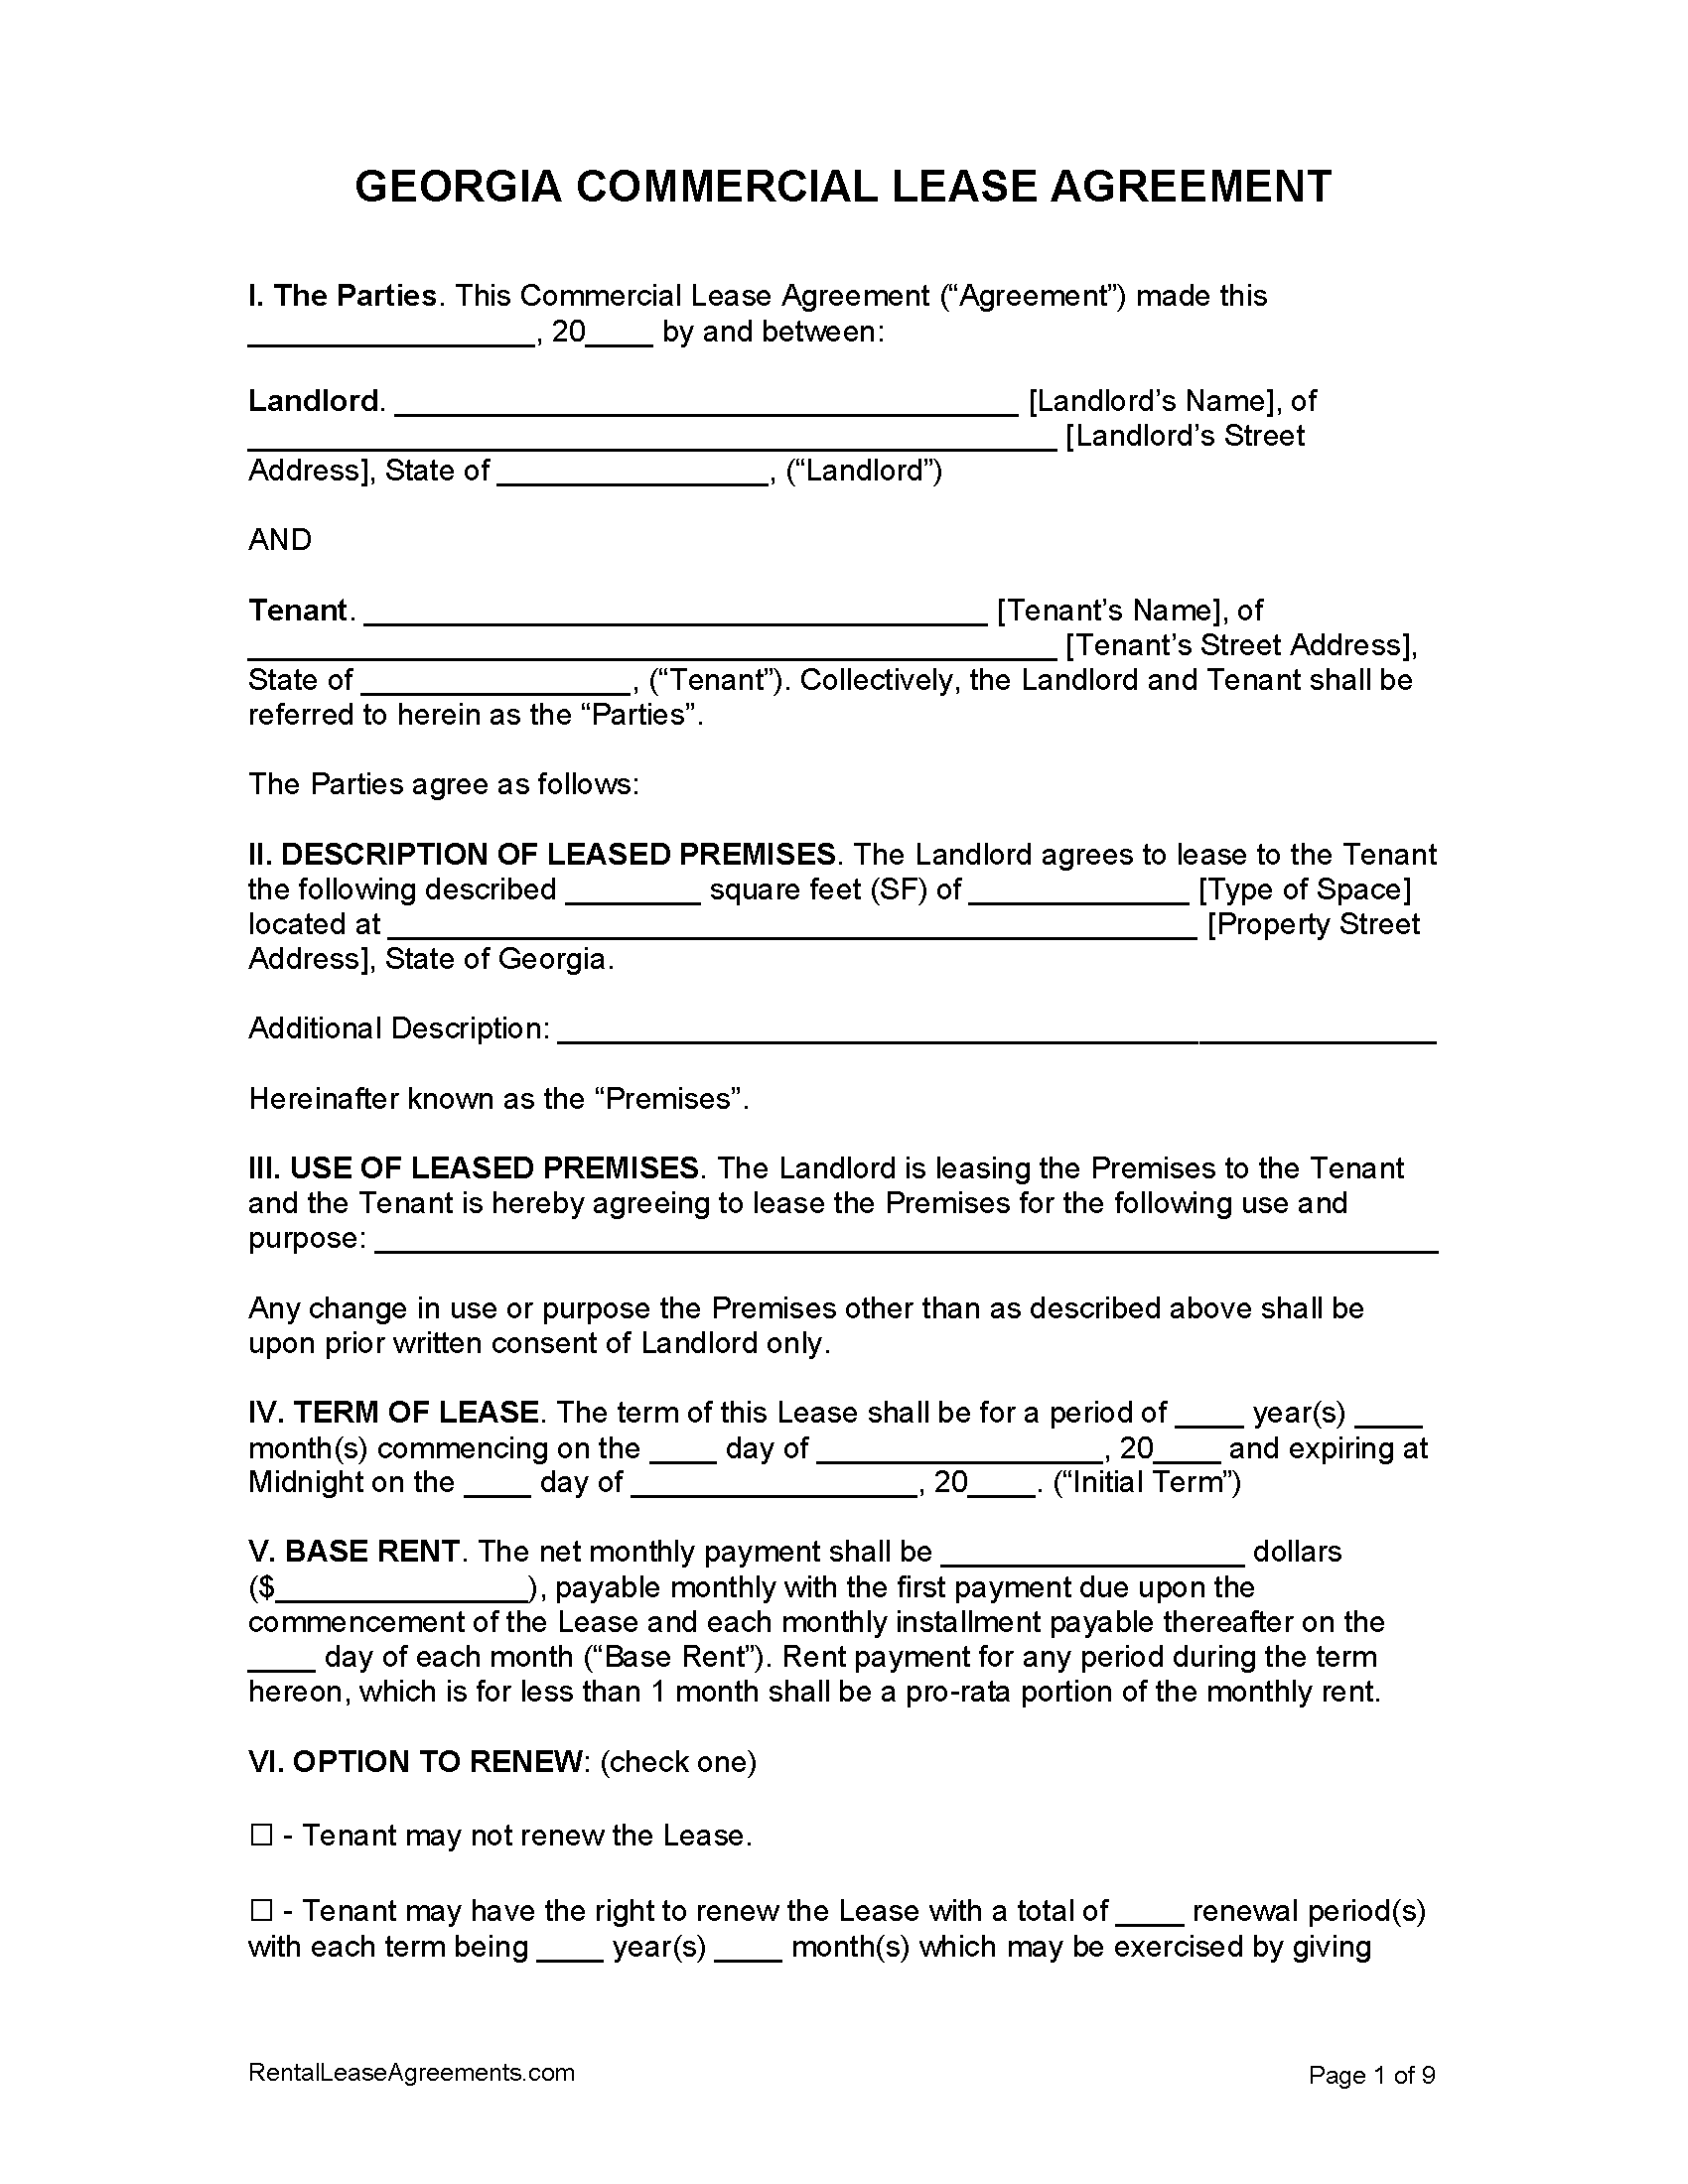 free georgia commercial lease agreement pdf ms word